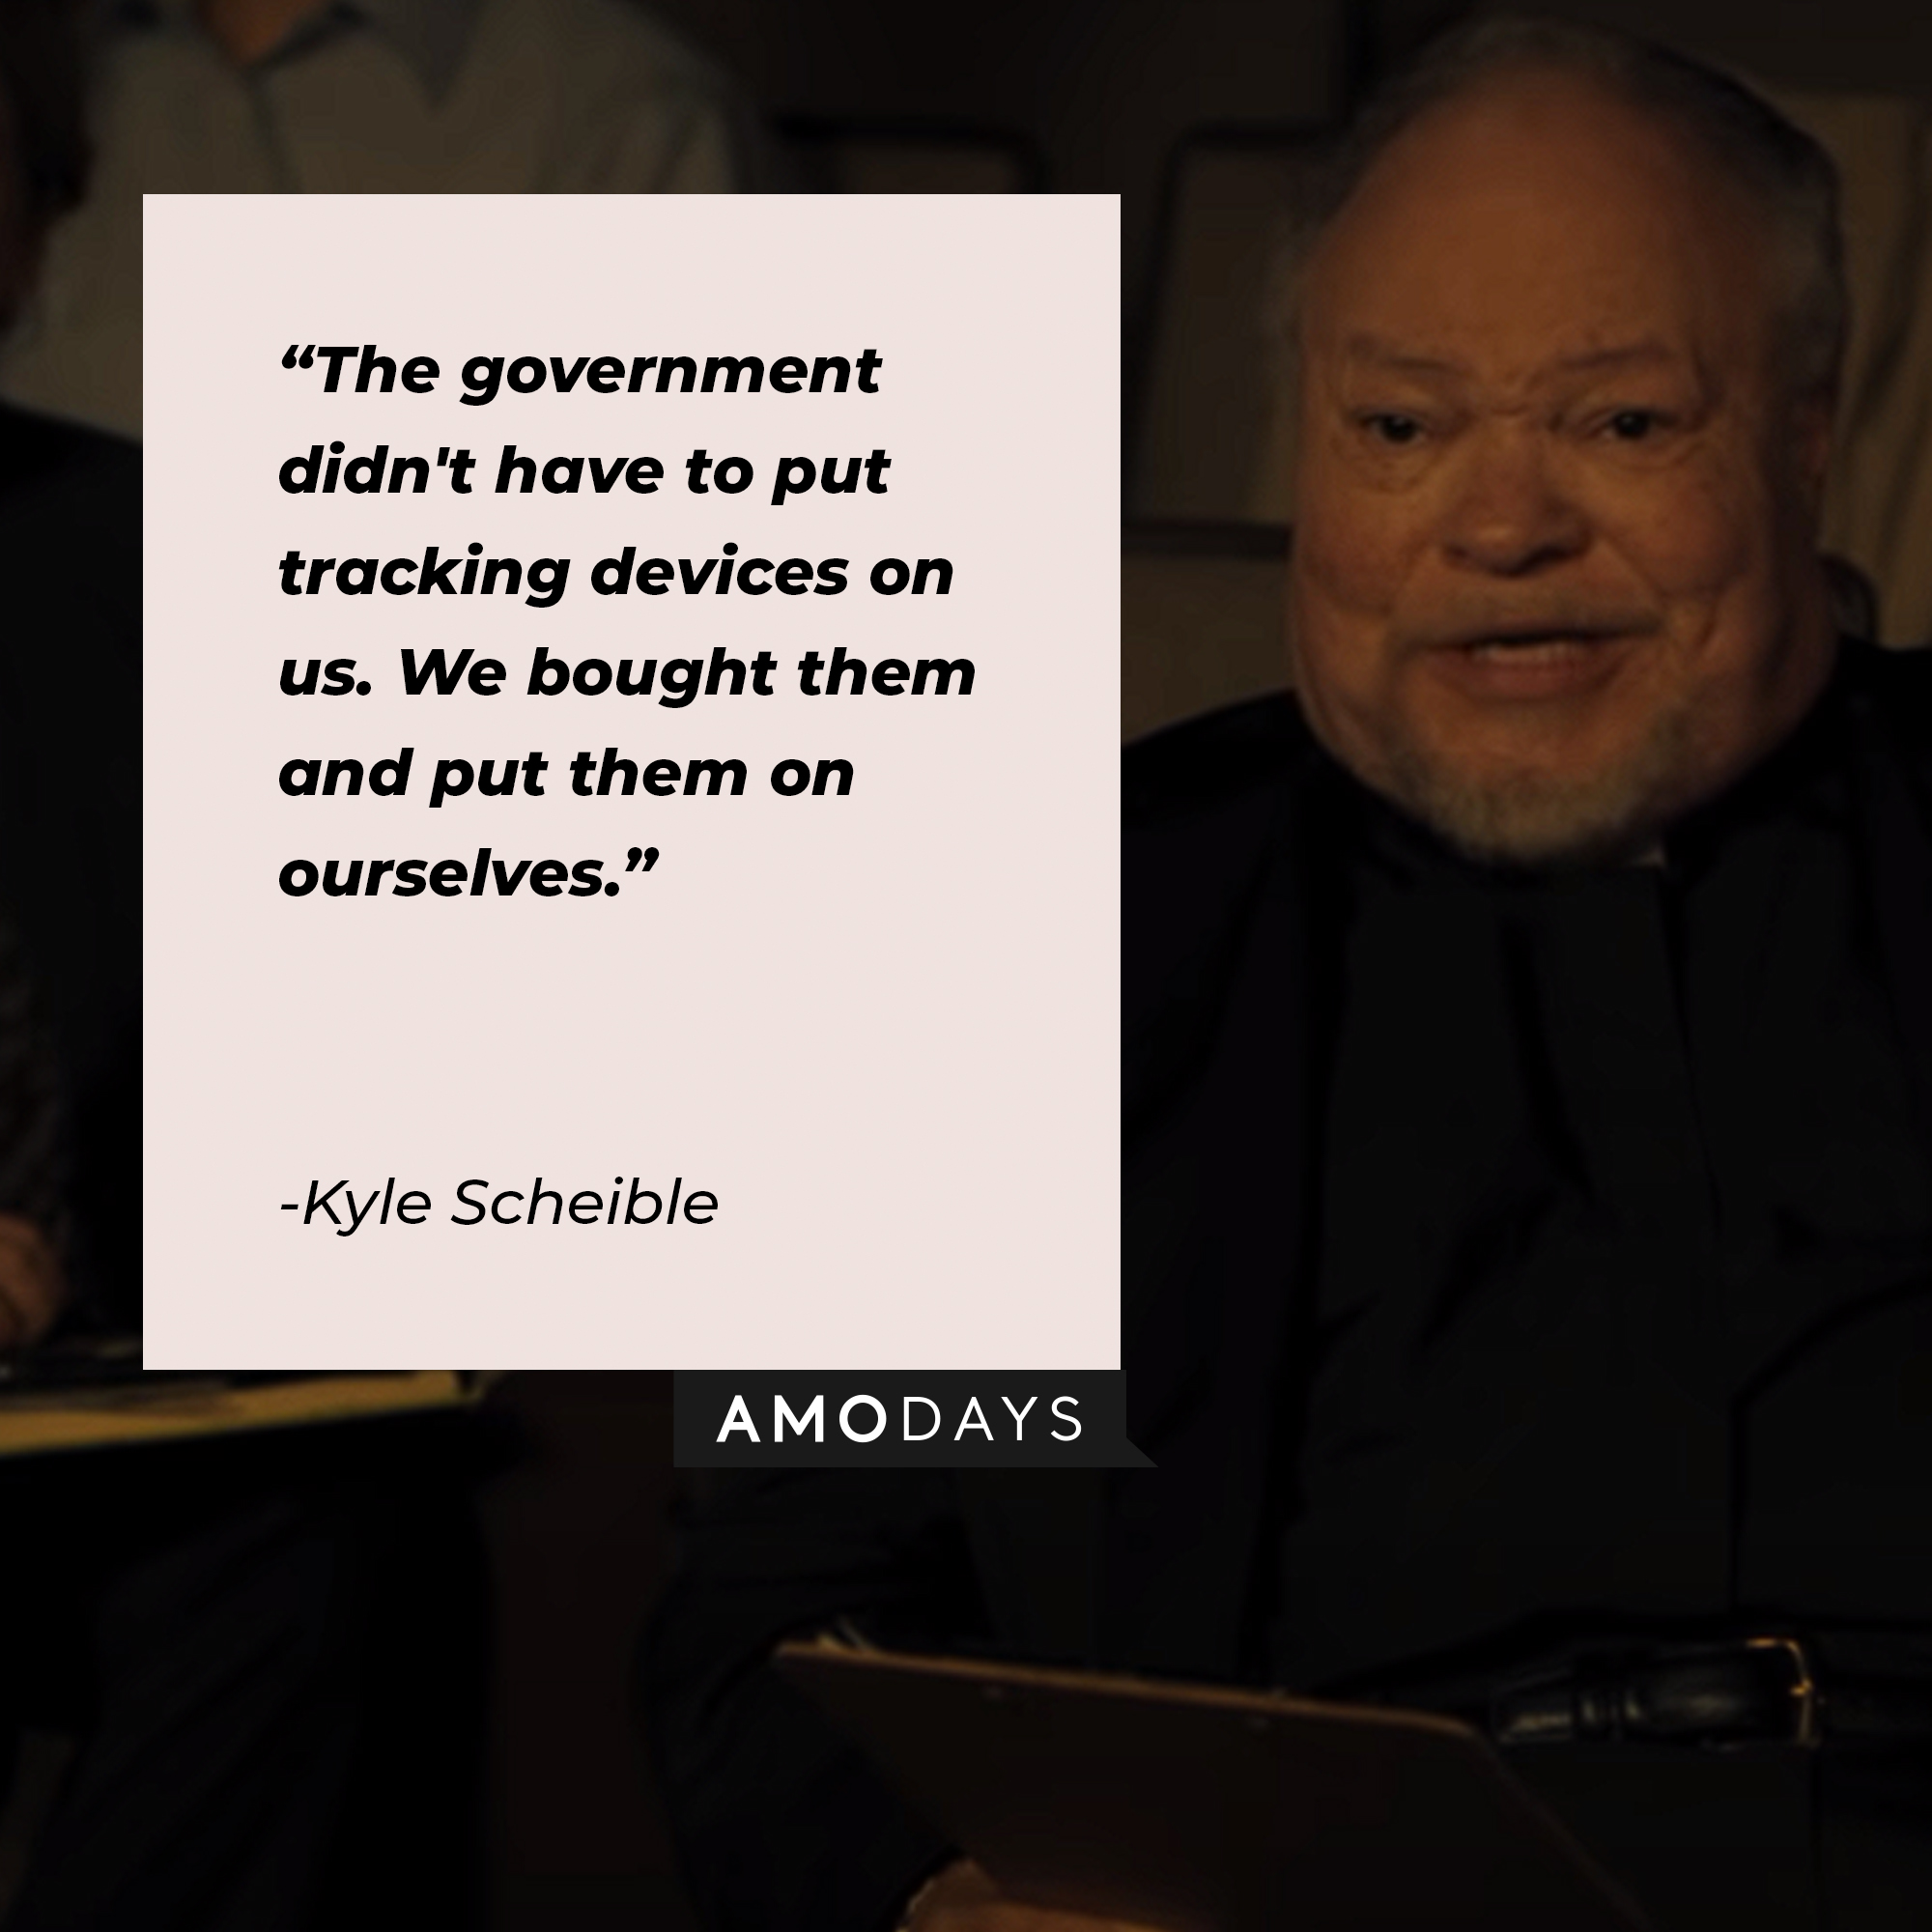 Kyle Scheible's quote: "The government didn't have to put tracking devices on us. We bought them and put them on ourselves." | Source: youtube.com/A24